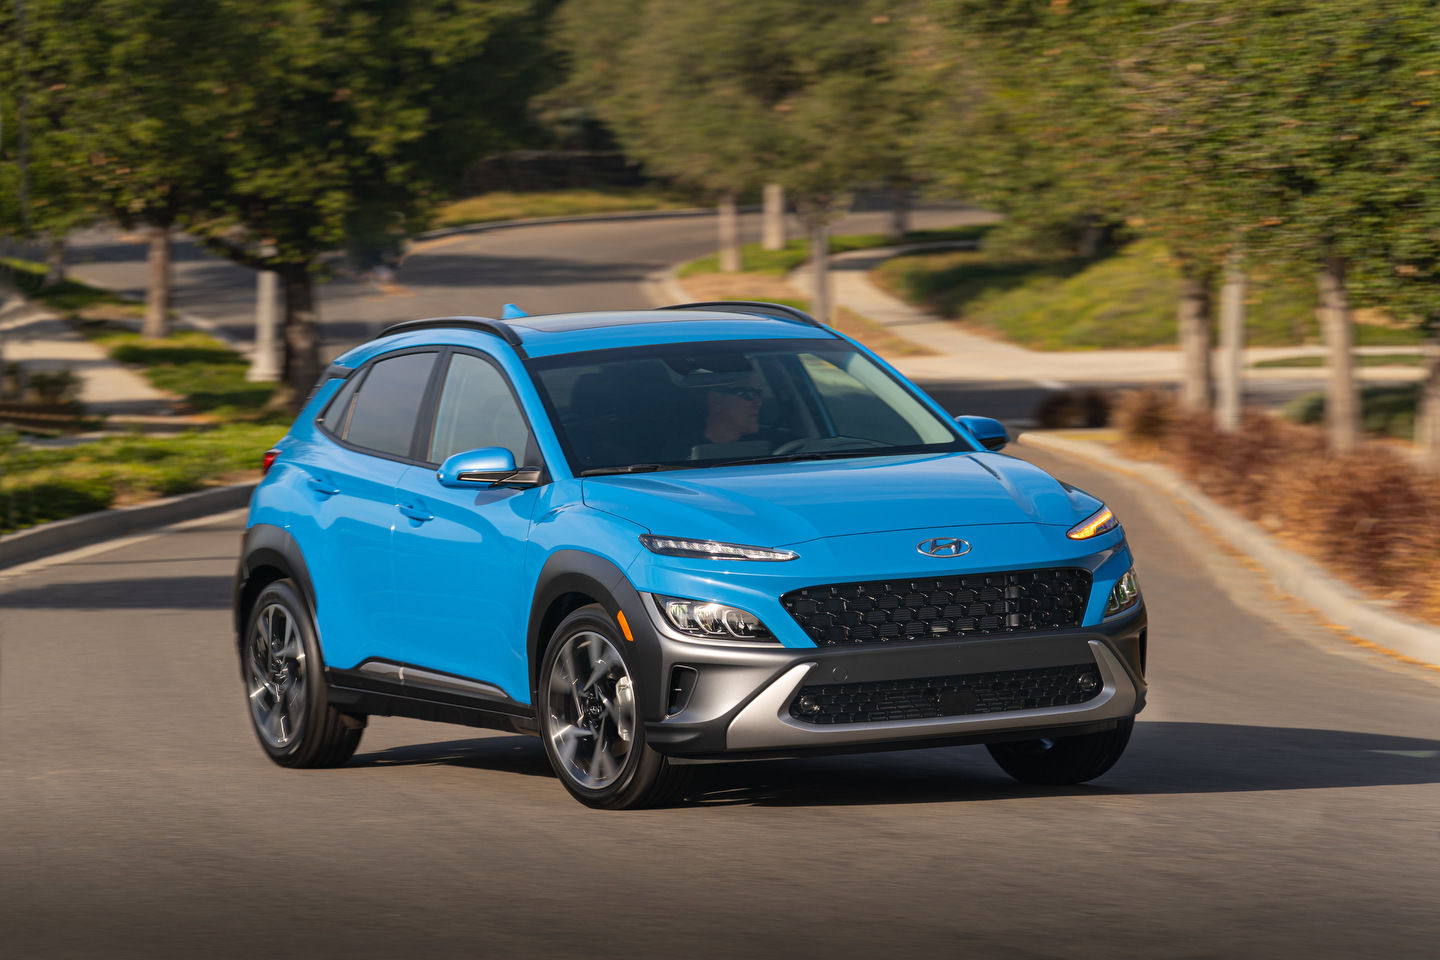 The 2022 Hyundai Kona has everything you want in a small SUV